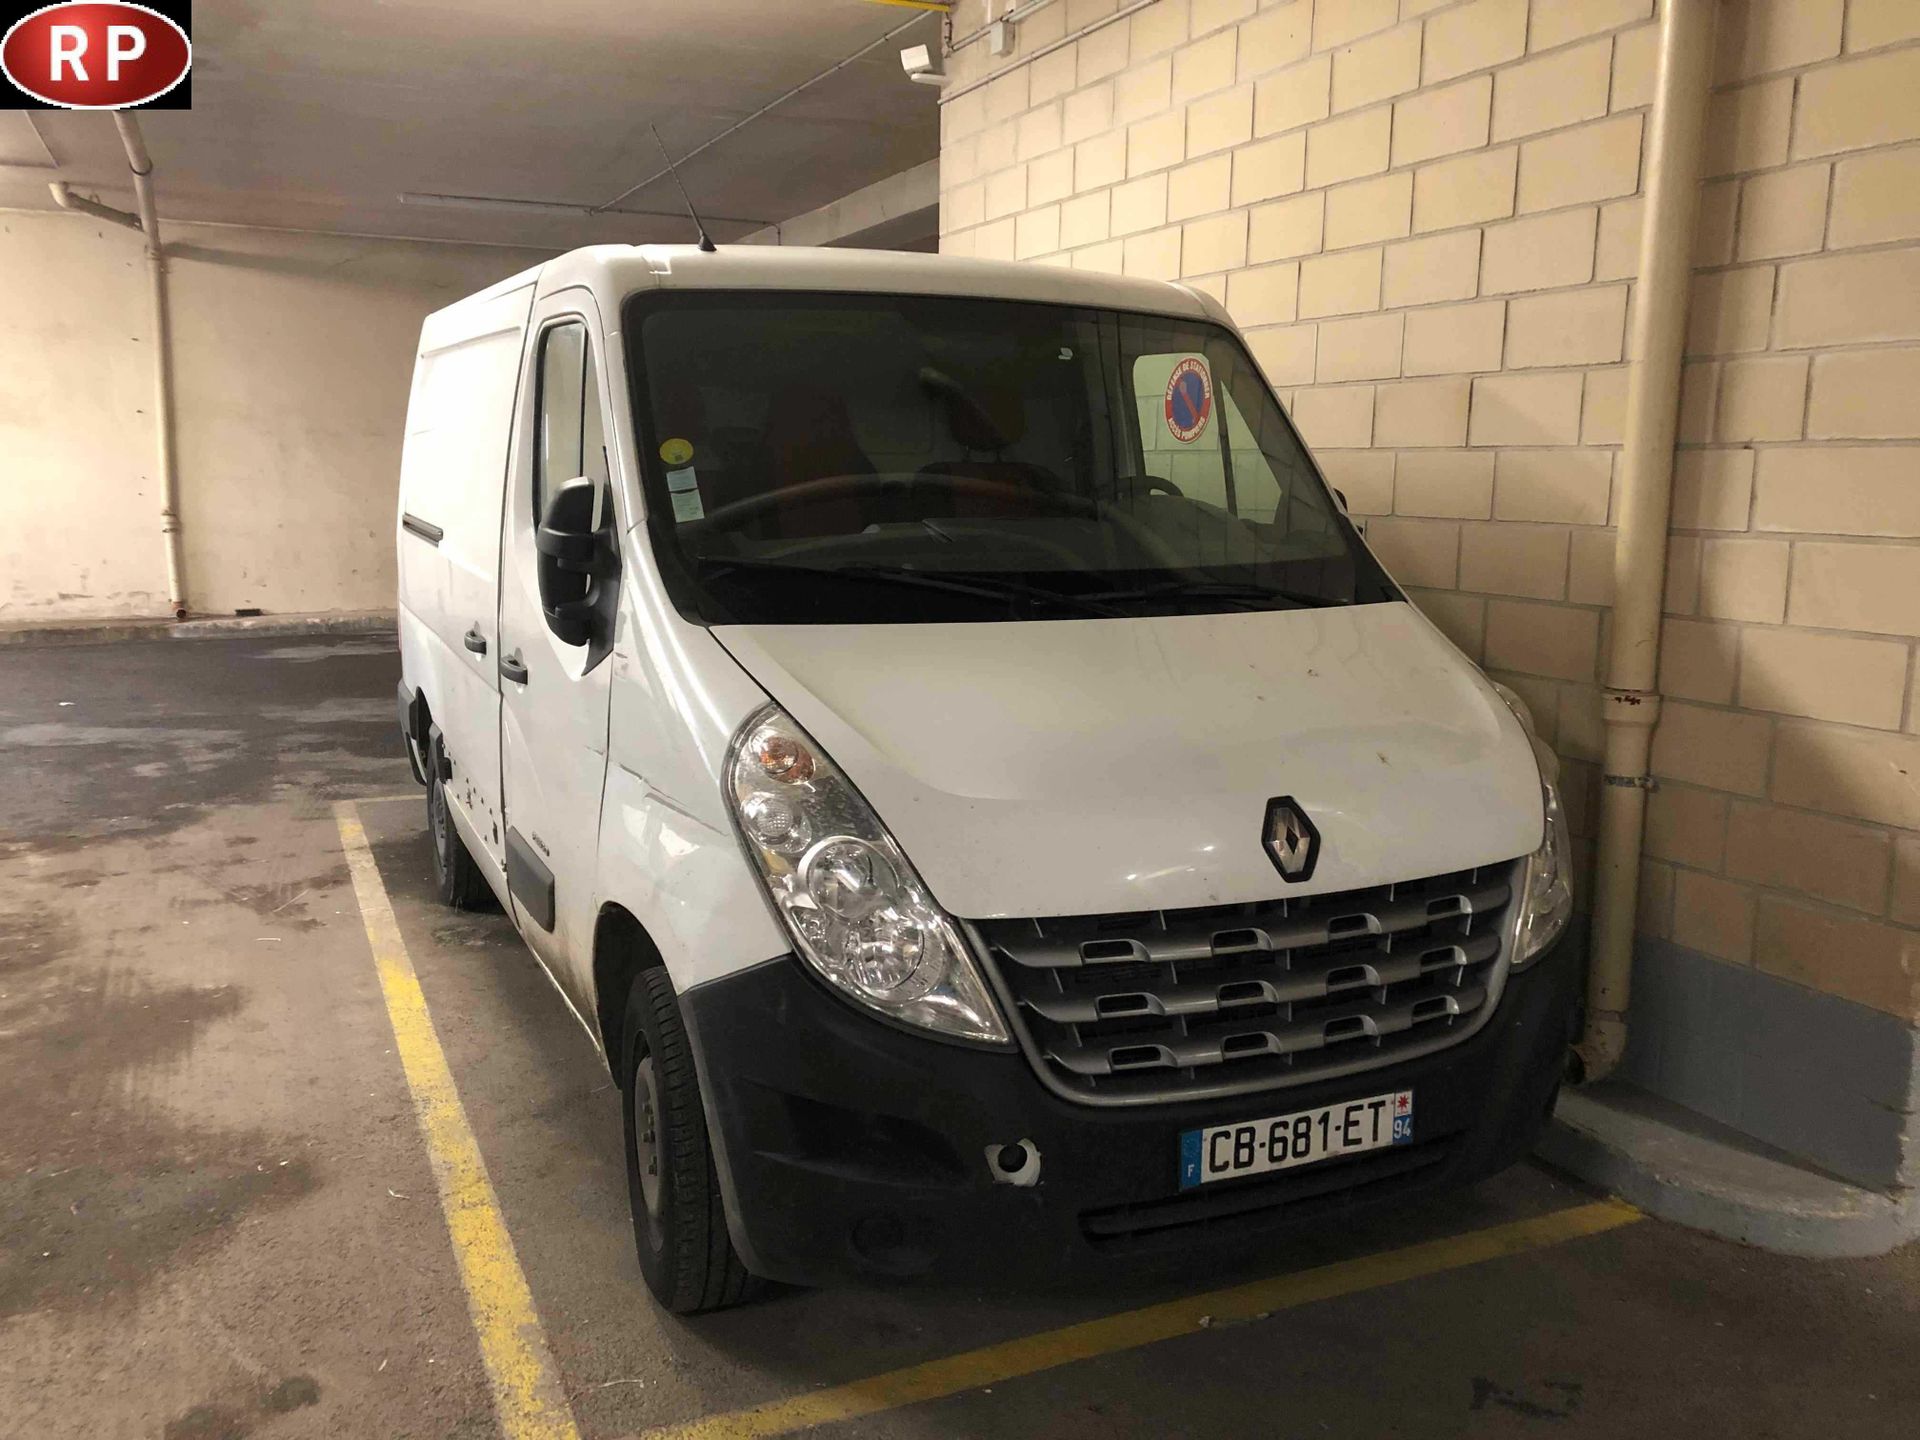 Null [RP] RENAULT Master 2.3 dCi 100, Gazole, imm. CB-681-ET, type N10RENCT006M6&hellip;